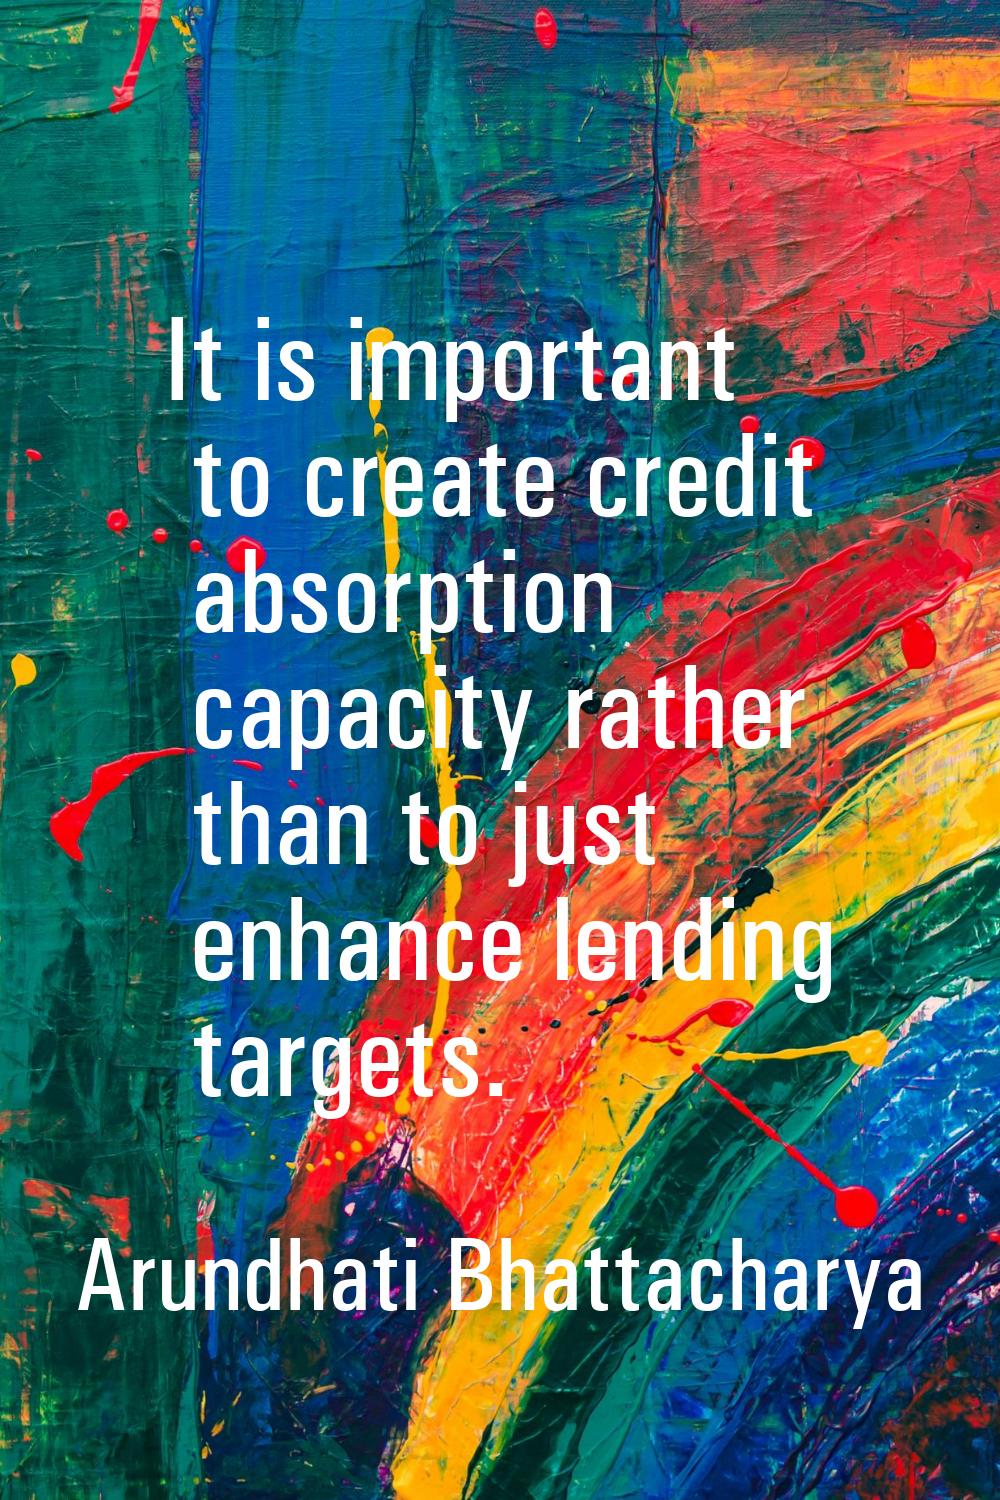 It is important to create credit absorption capacity rather than to just enhance lending targets.